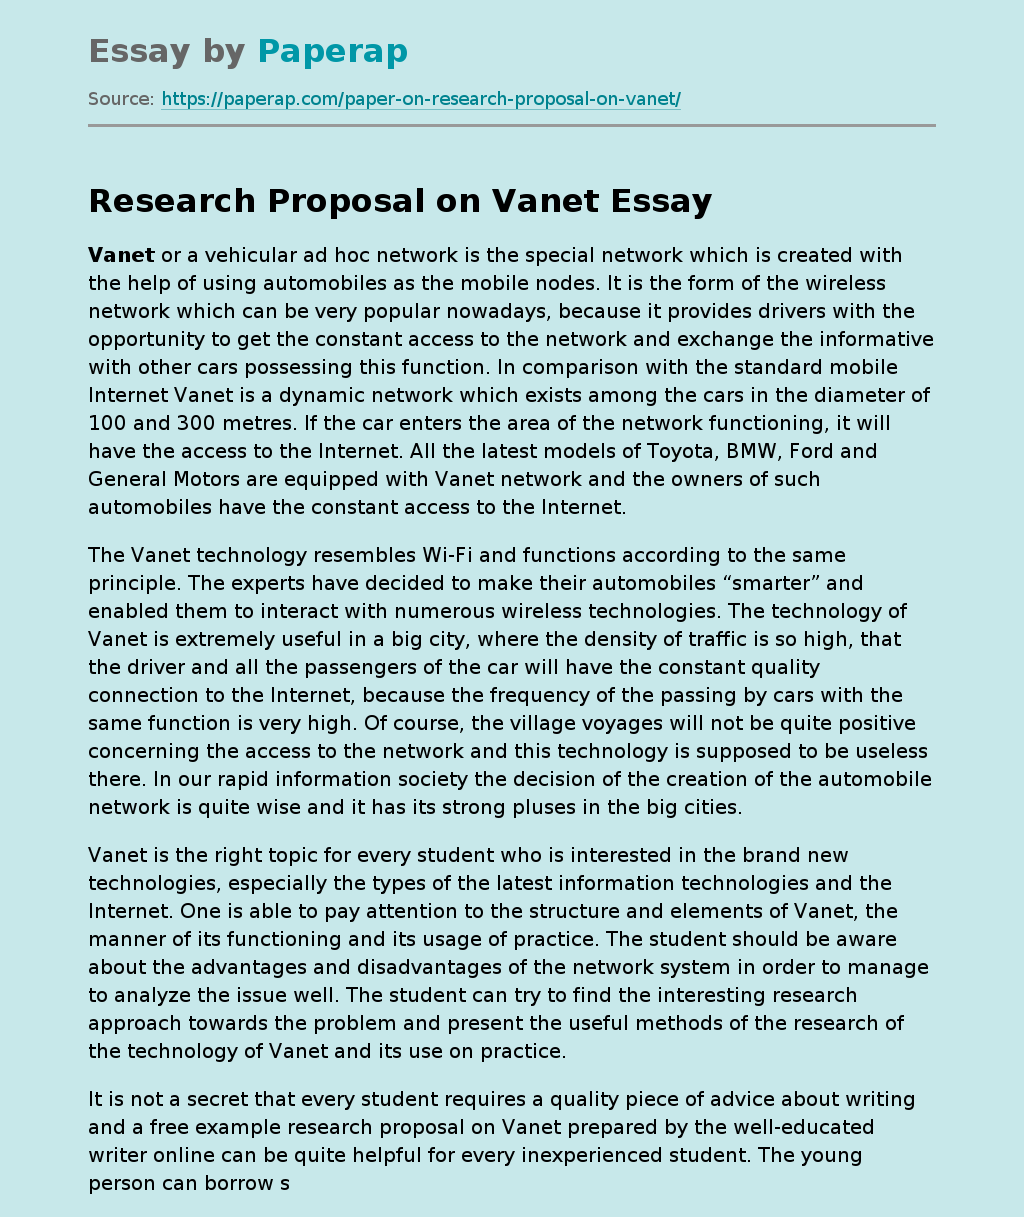 Research Proposal on Vanet